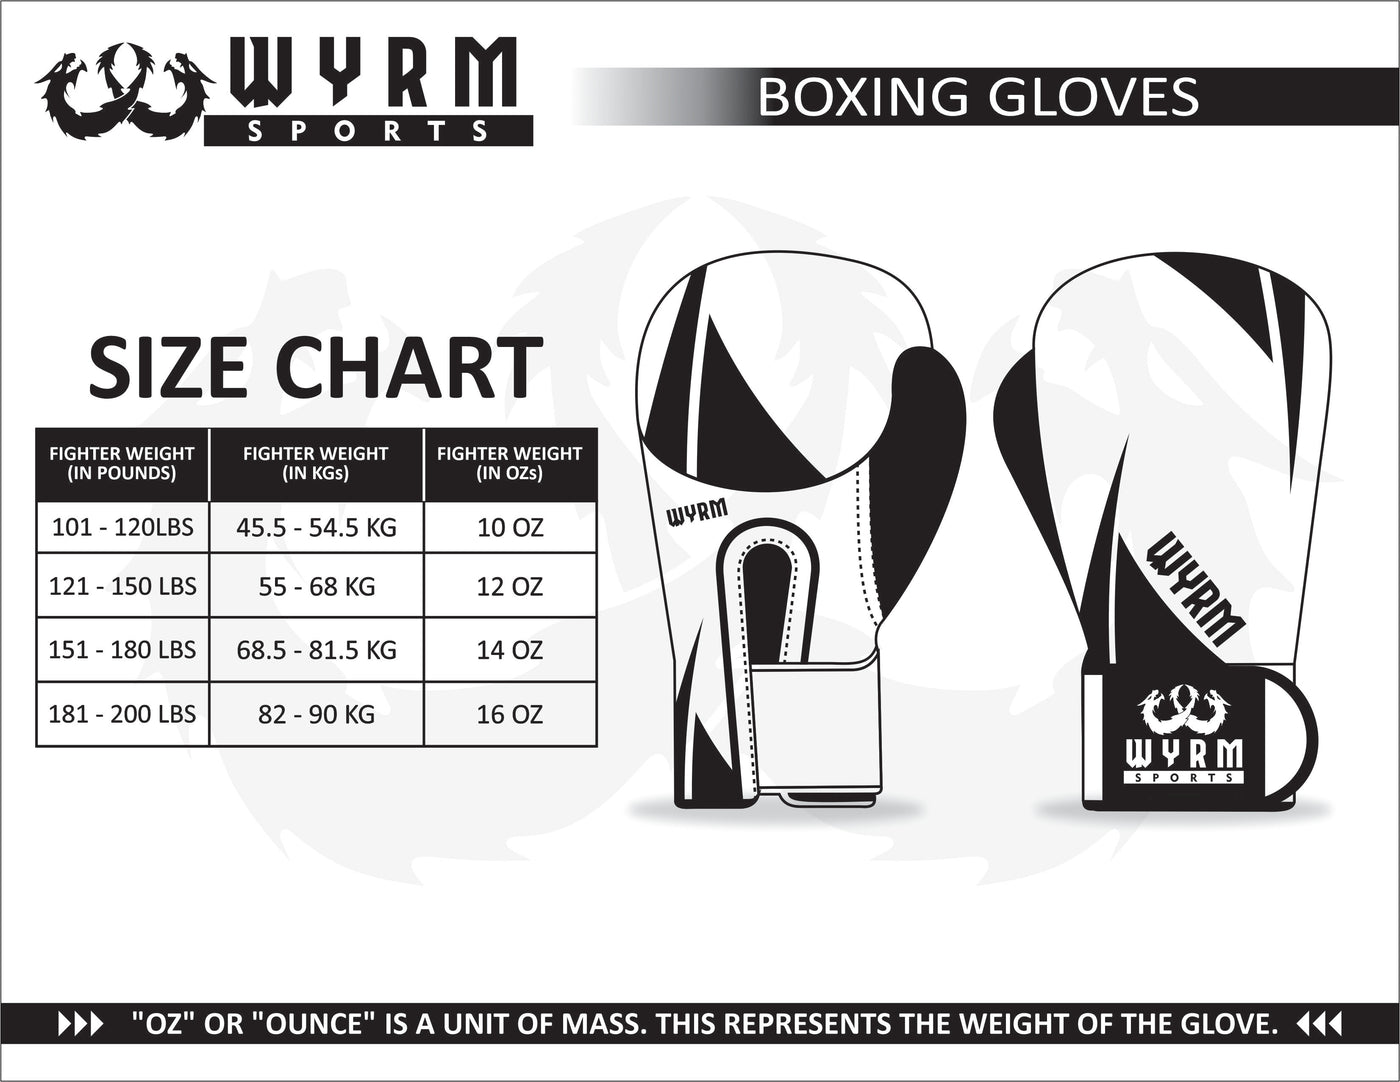 WYRM Deluxe Rose Gold Customized Pro Boxing Genuine Leather Gloves